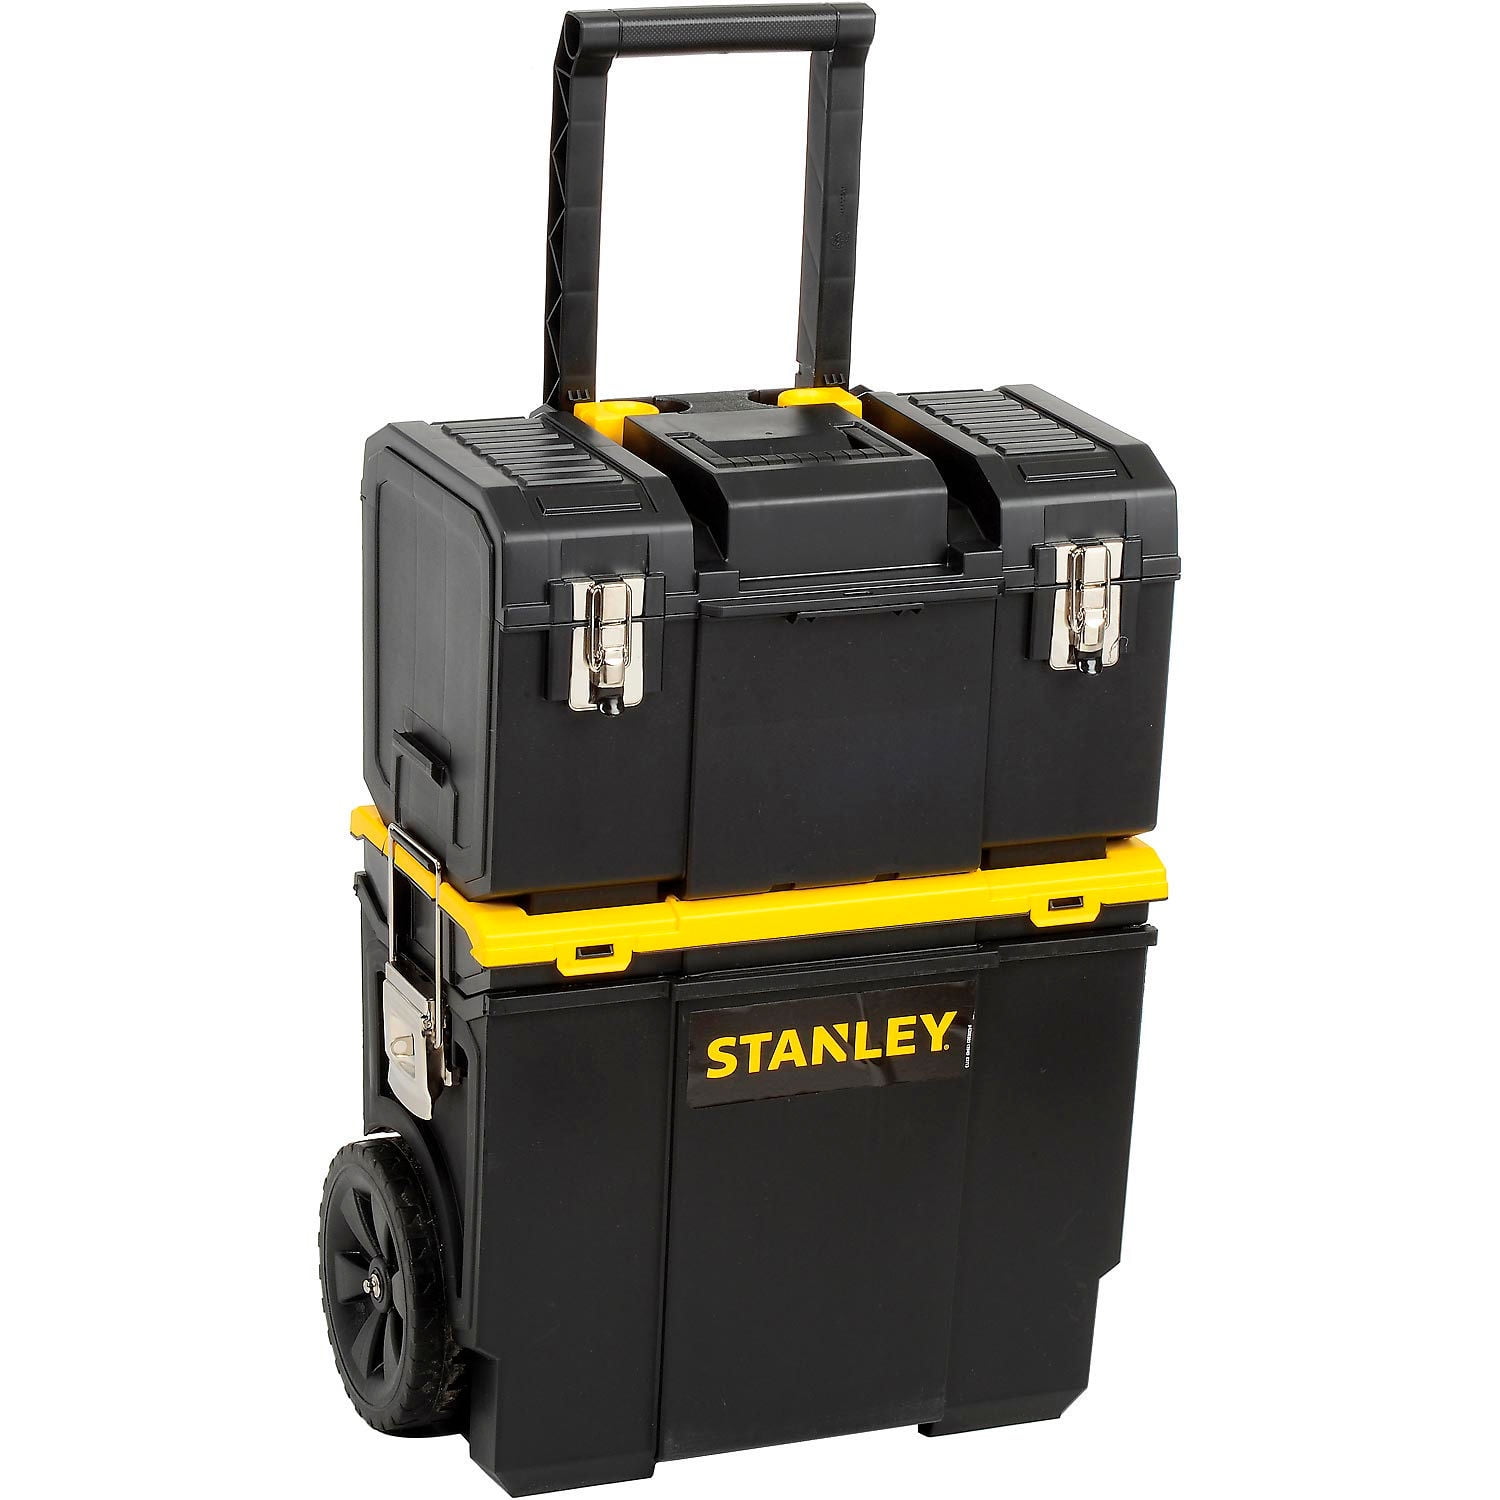 for sale online Stanley FATMAX 4-in-1 Mobile Work Station S020800R 